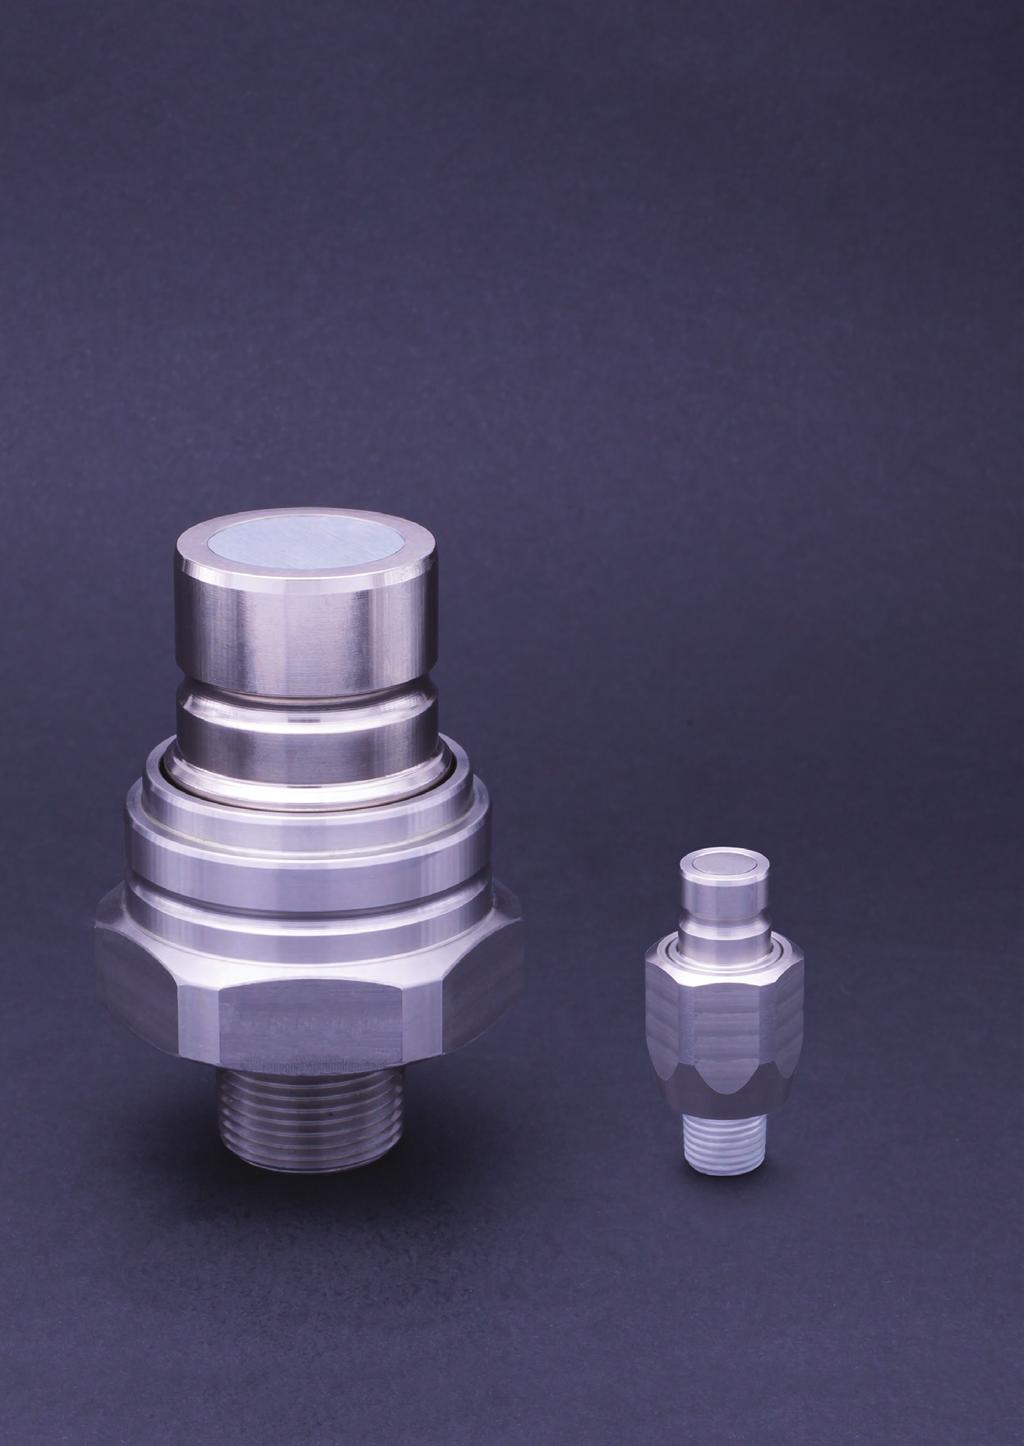 Connect-Under-Pressure Coupling The Size 11 nozzle and receiver in our Flush Face range was specifically designed to connect whilst the transfer line is subjected to residual line pressure.